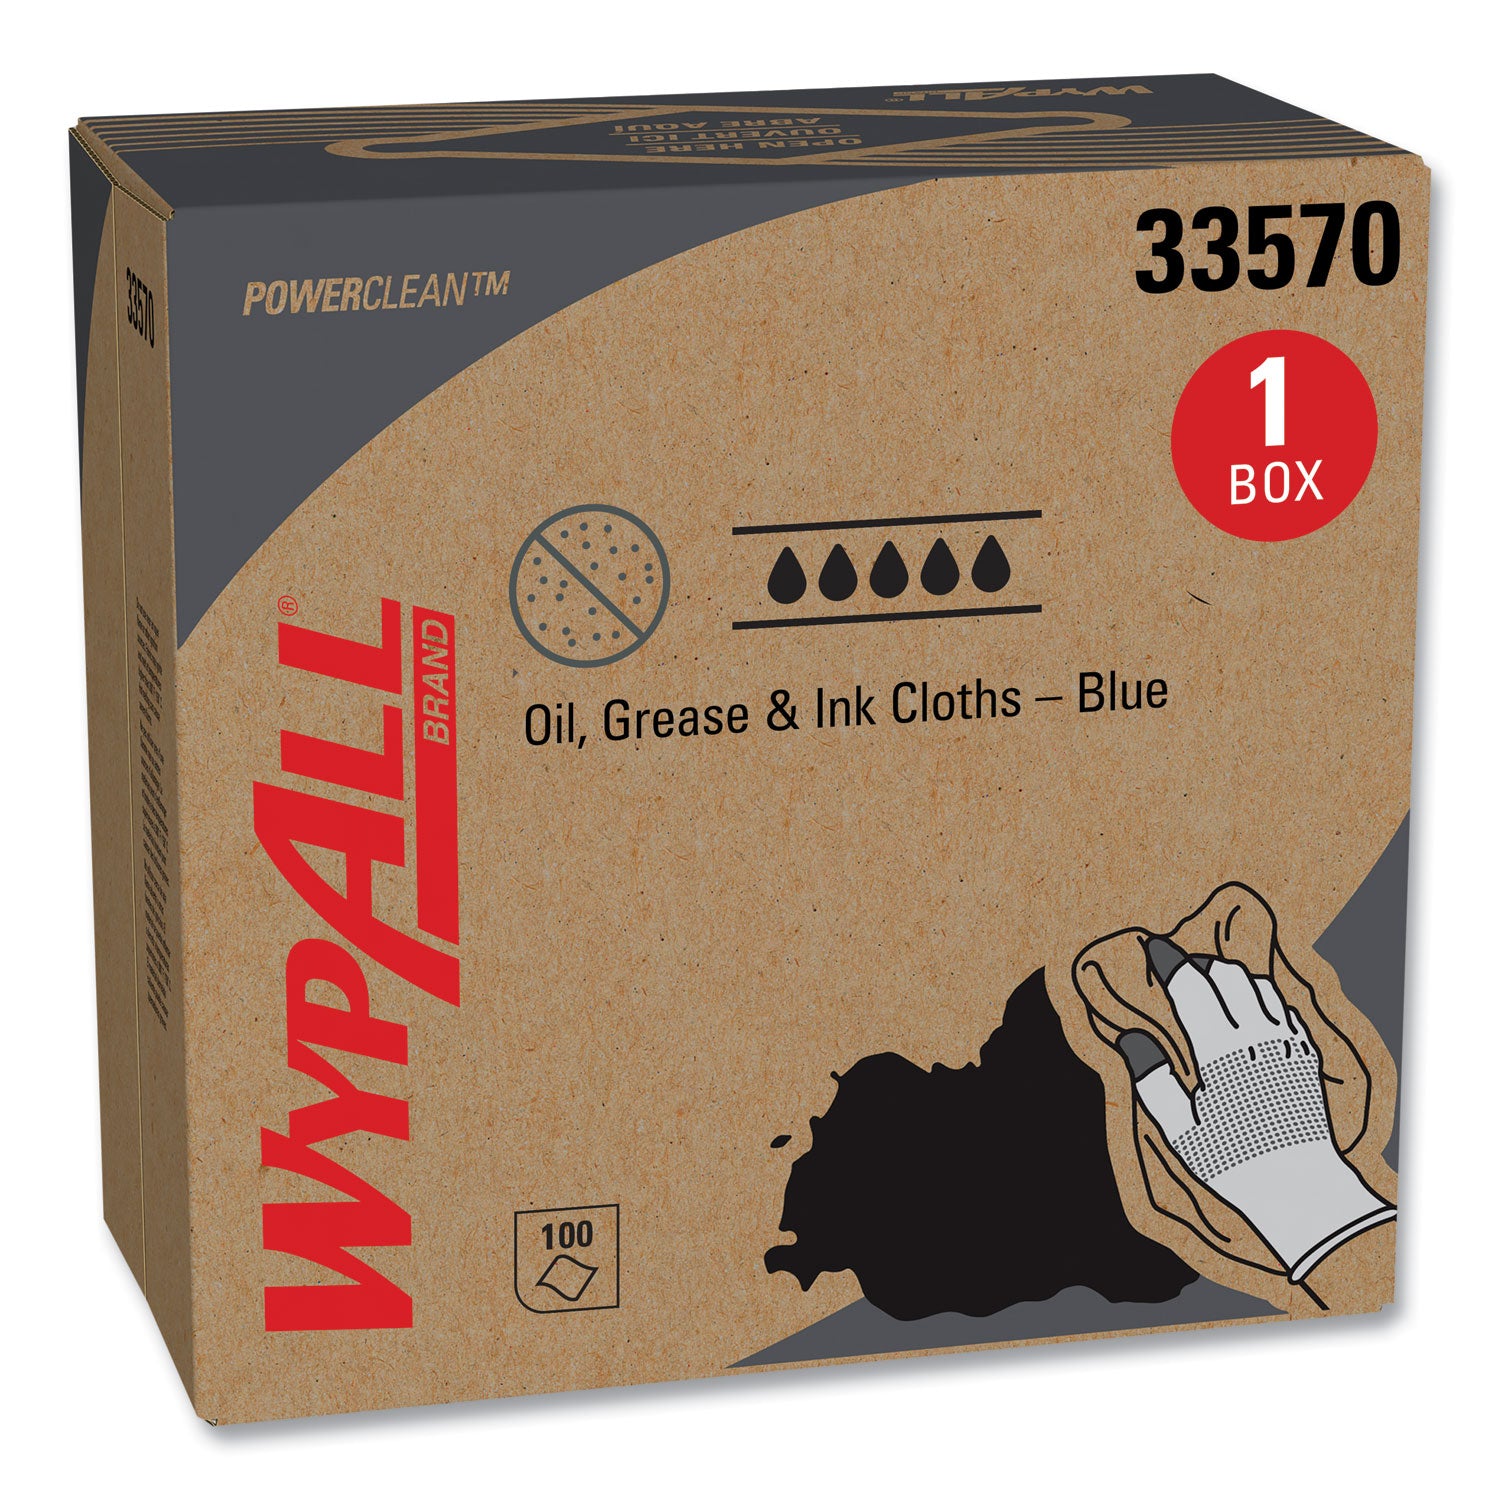 power-clean-oil-grease-and-ink-cloths-pop-up-box-88-x-168-blue-100-box-5-carton_kcc33570 - 4